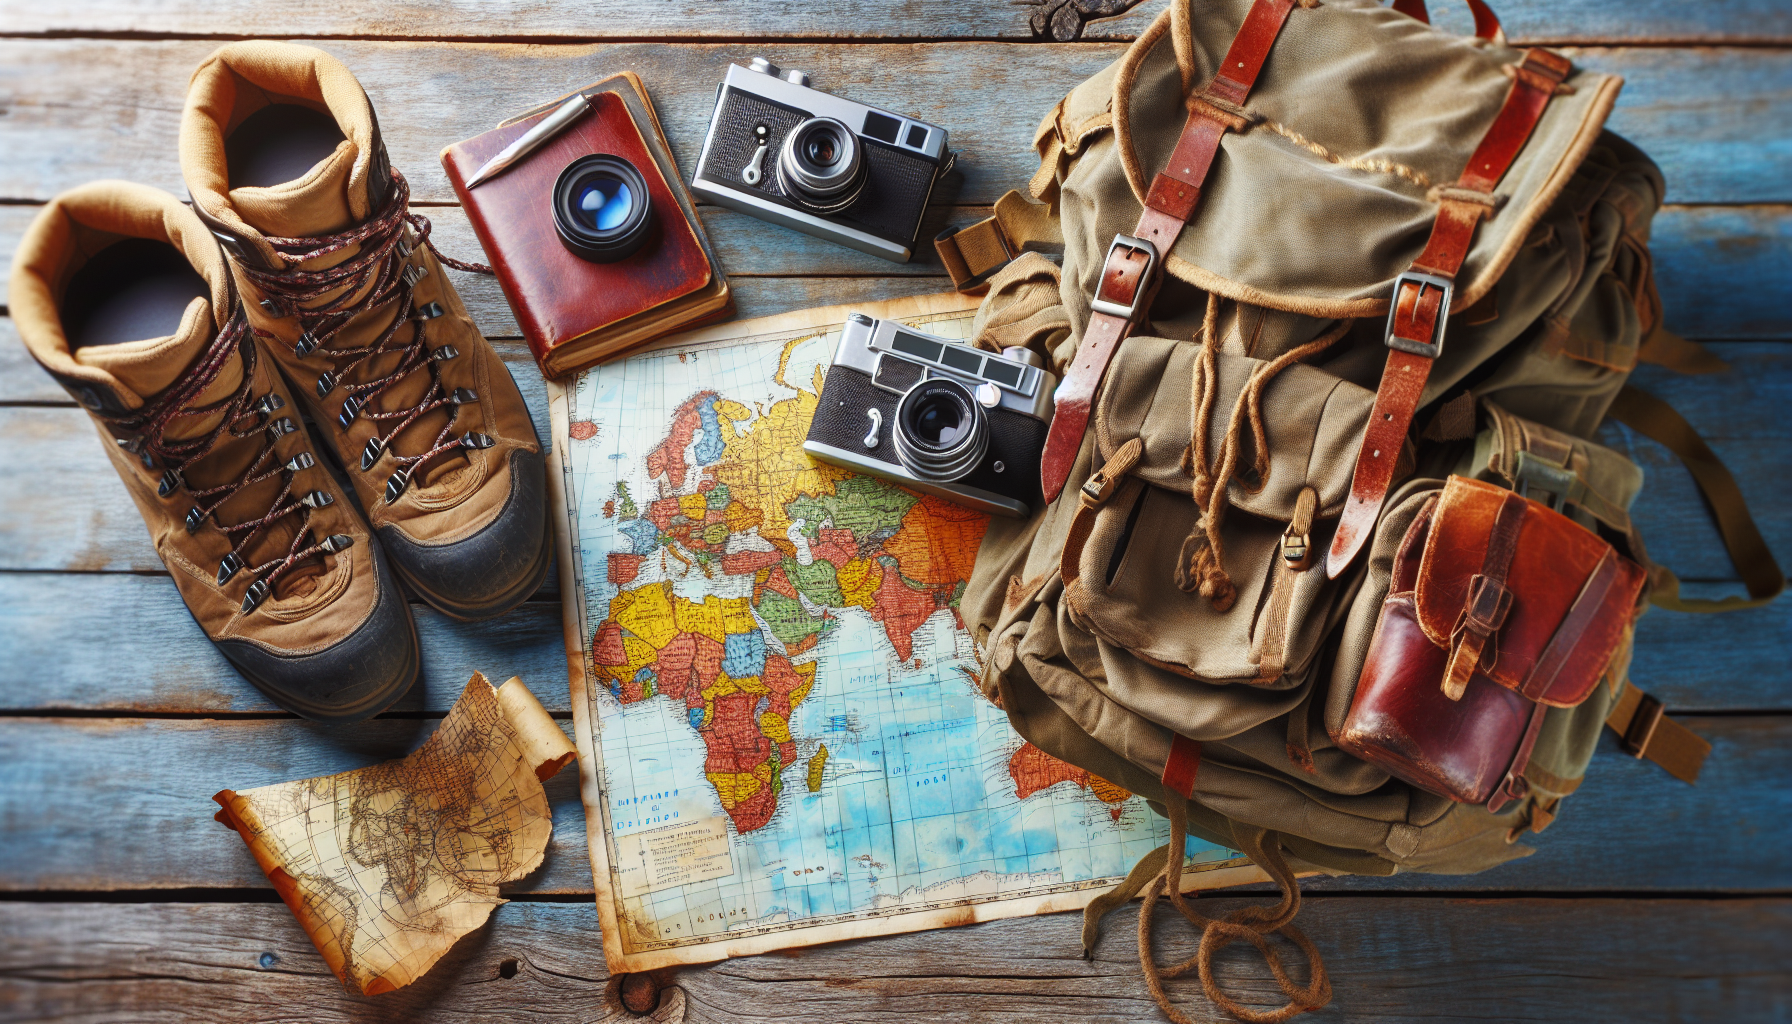 explore travel adventures and activities on our engaging travel blog filled with exciting stories and tips.